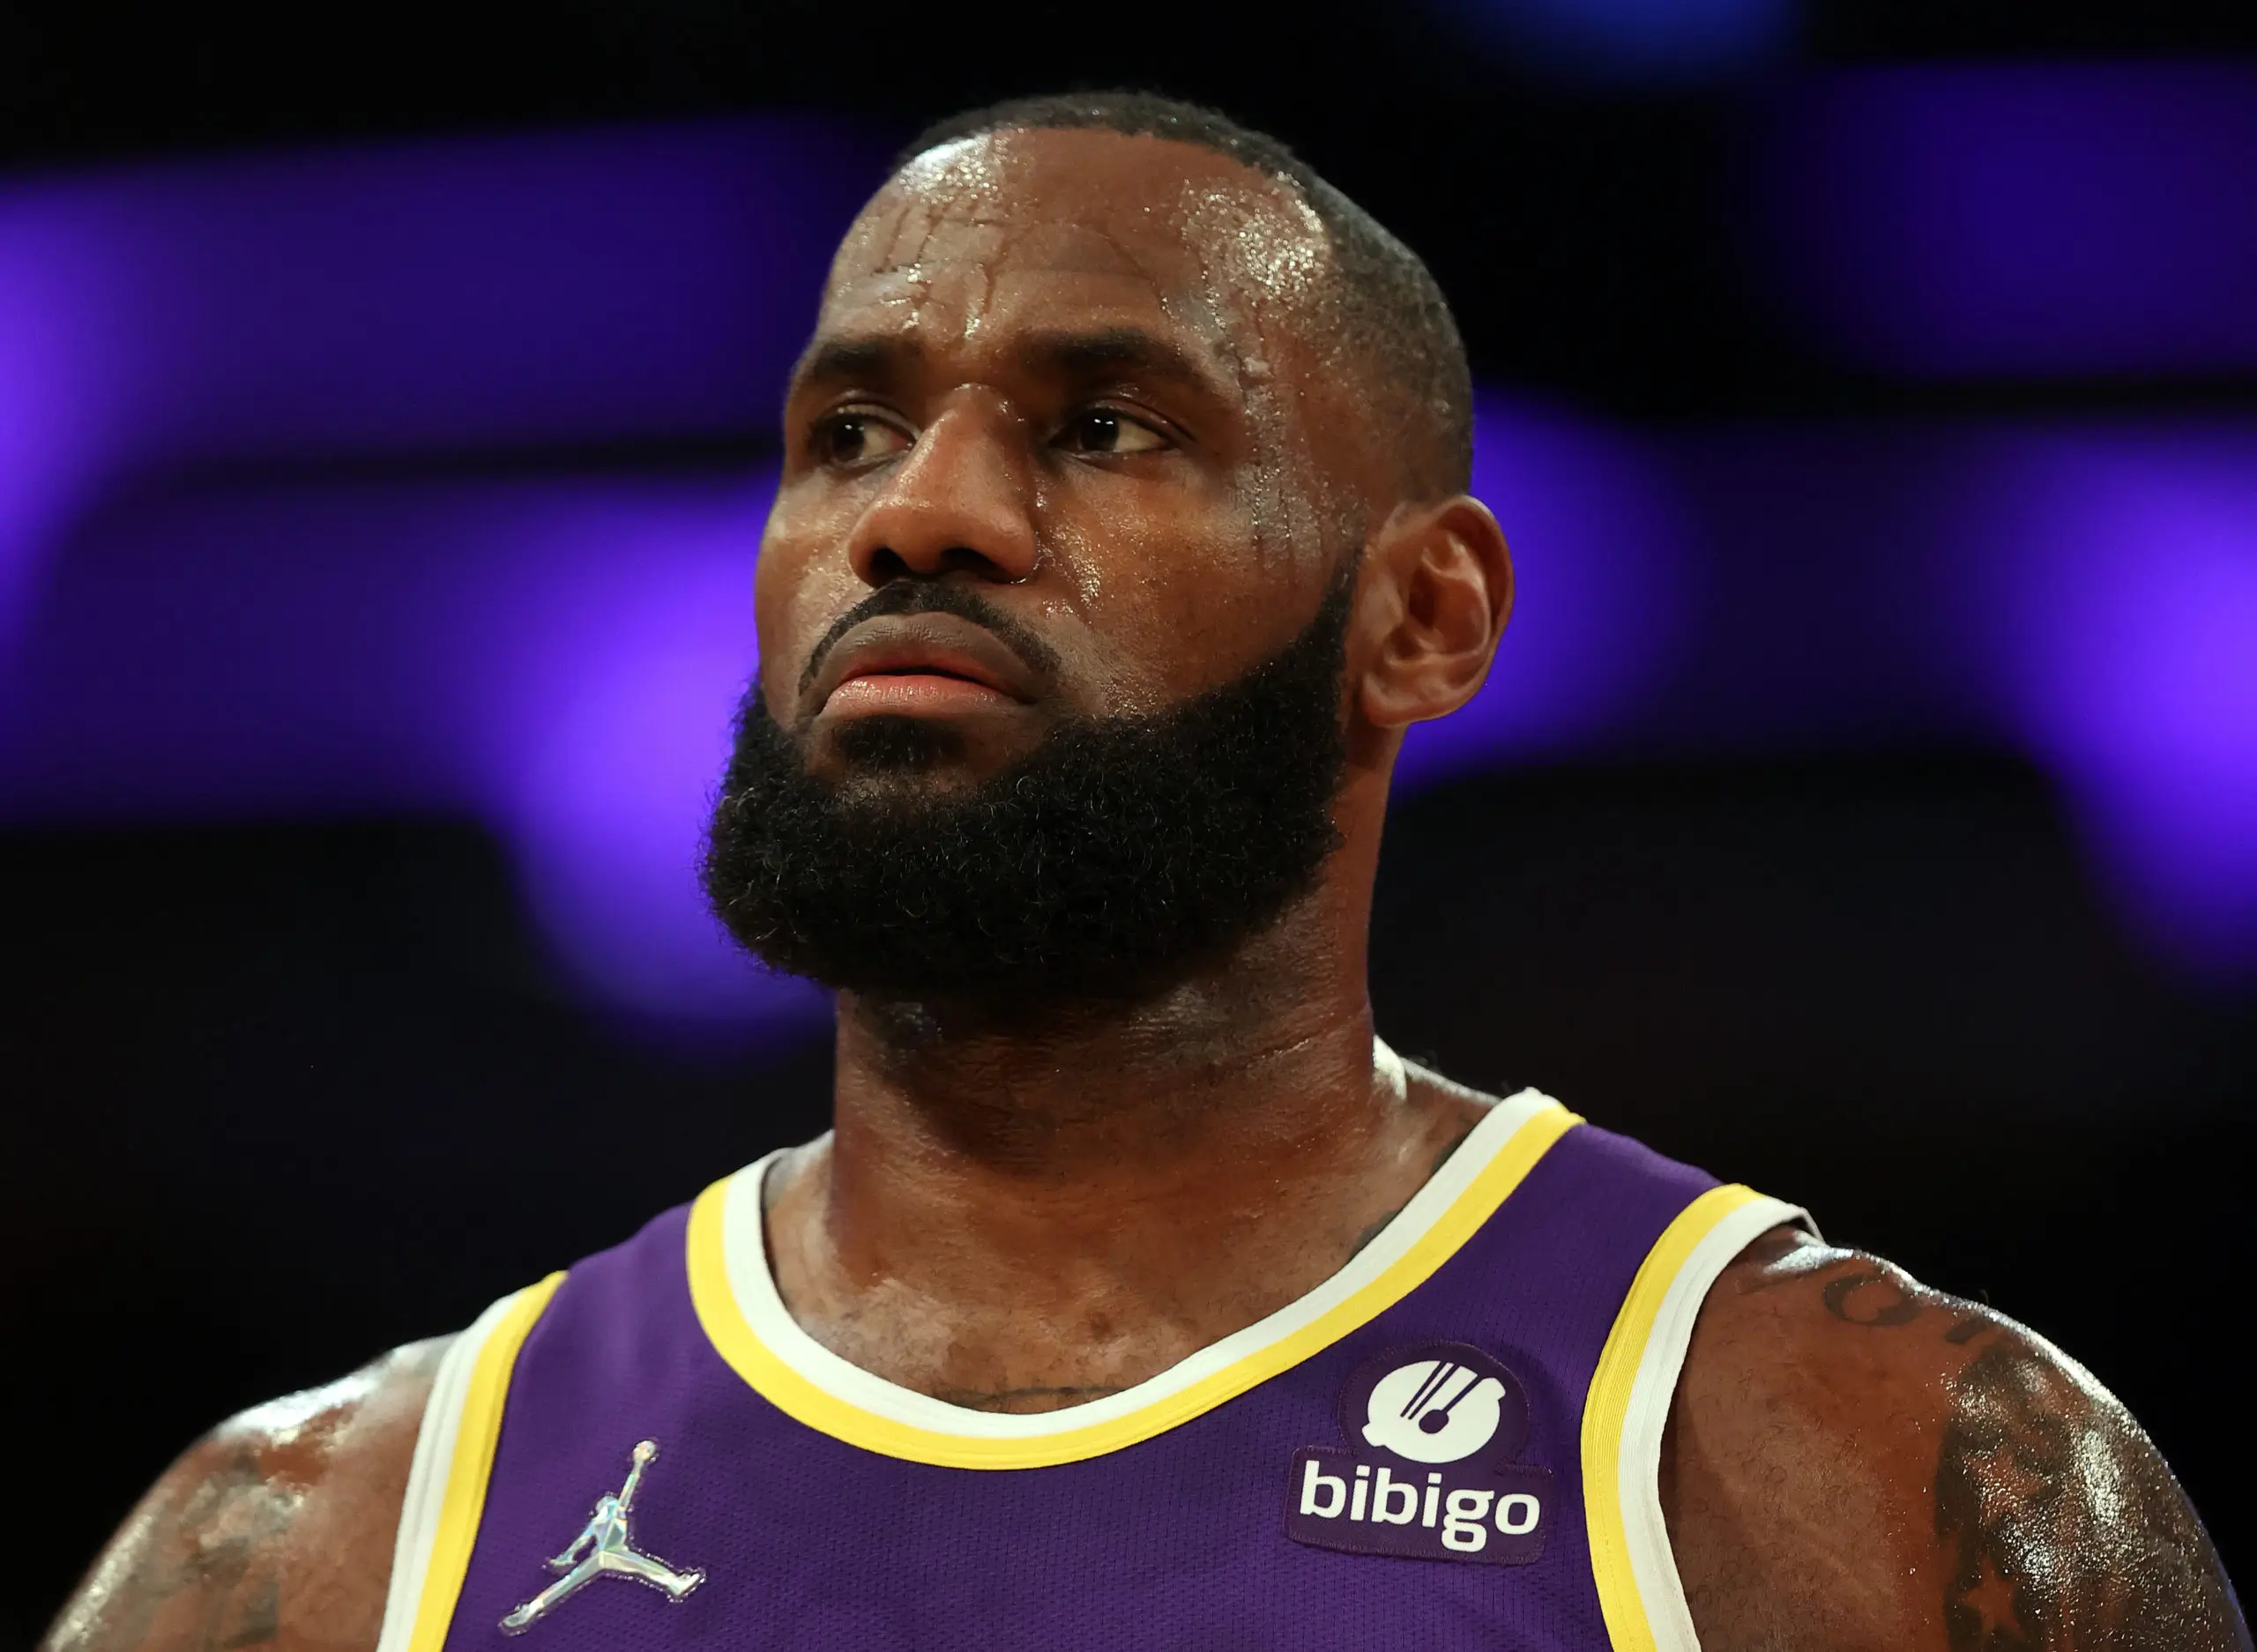 LeBron James fans demand legal action against angry fan who revealed his location after being denied a selfie